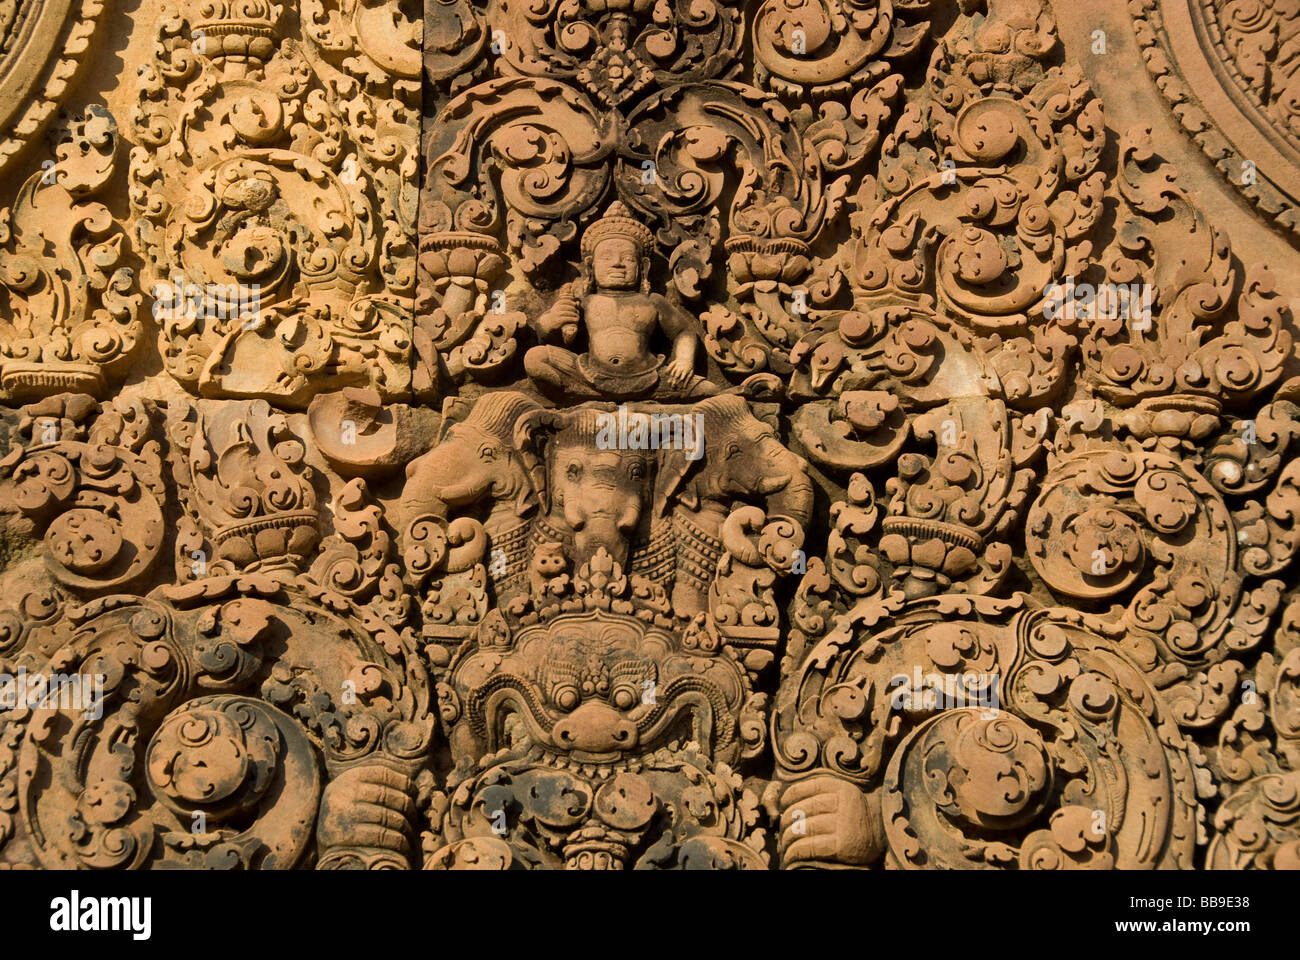 Detail from Banteay Srei, the citadel of the women or beauty, famed for intricate red sandstone carvings of mythical creatures like Kala. Cambodia. Stock Photo